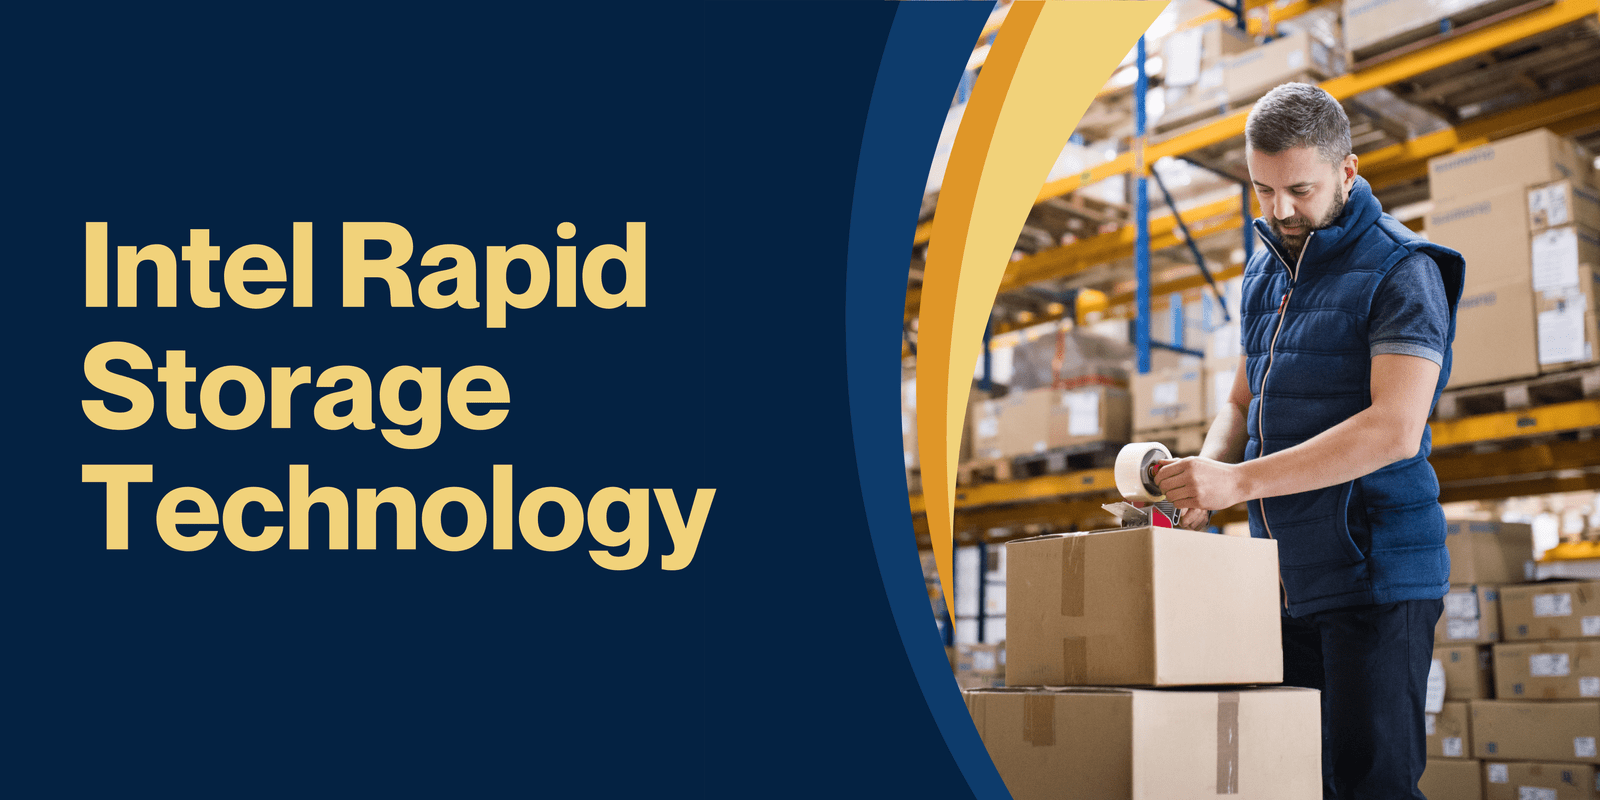 Intel Rapid Storage Technology is a Windows-based free application that is used on PCs to improve their performance. It works with SATA drives to improve PC speed and storage.